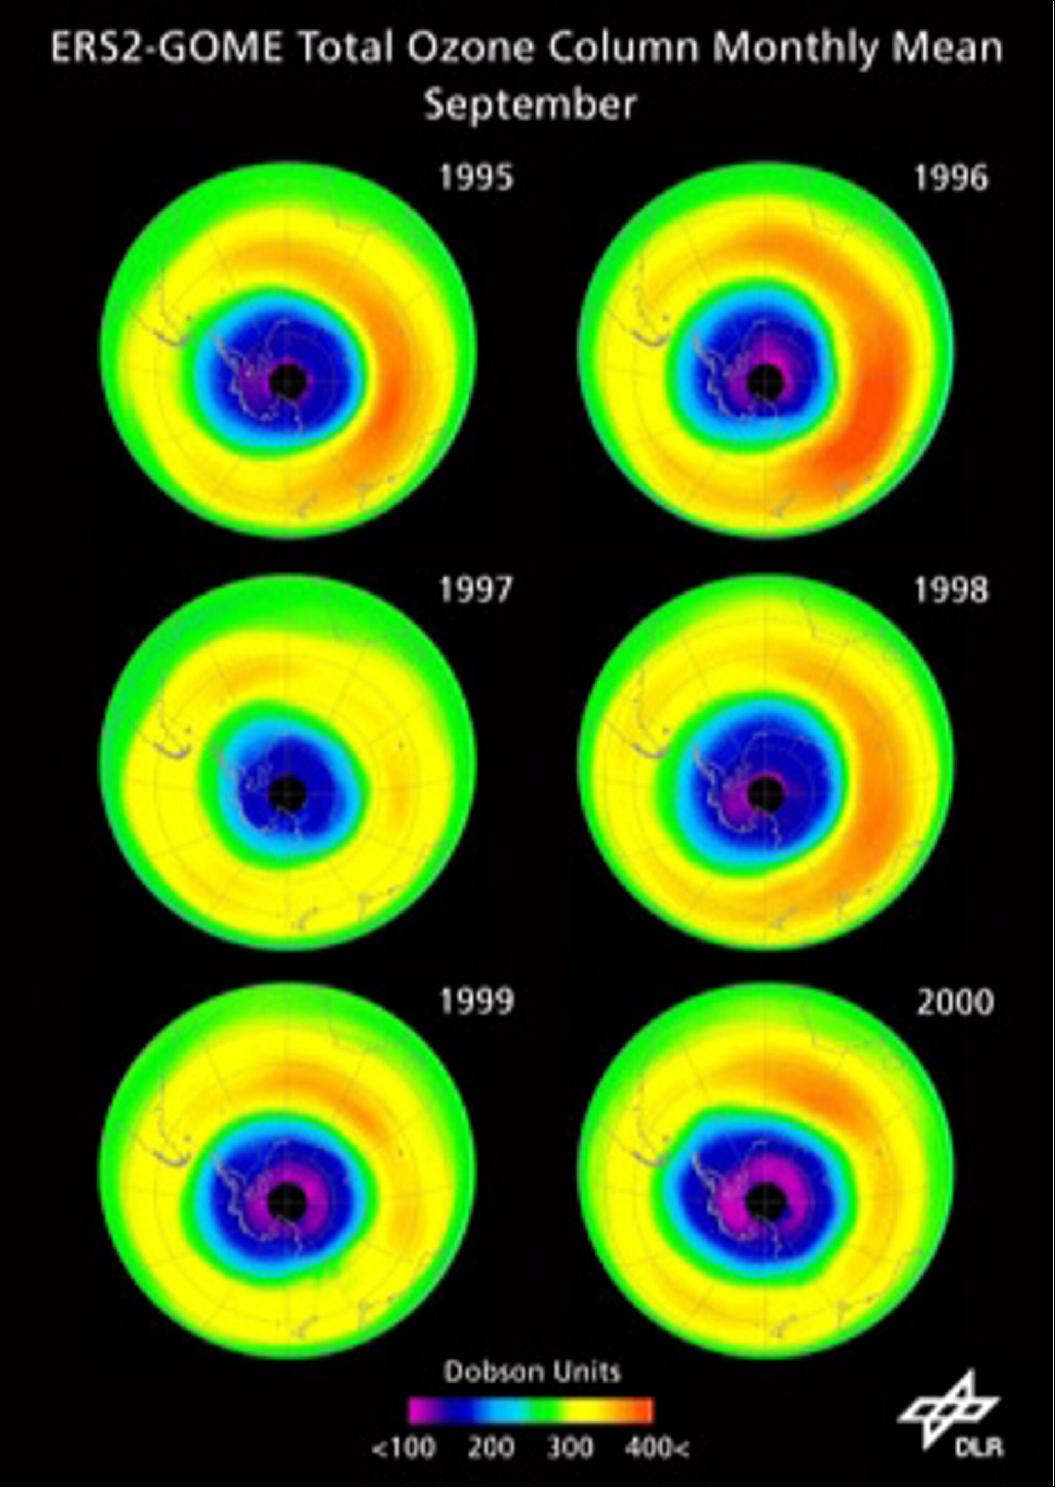 Figure 11: Through observations made by the Global Ozone Monitoring Experiment (GOME) on ERS-2, scientists have been able to track the hole in the ozone layer over Antarctica. This image shows how the hole has changed from 1995 to 2000. GOME was one of the longest serving ozone monitors in the world, with its success leading to a string of similar satellite sensors (image credit: ESA/DLR)